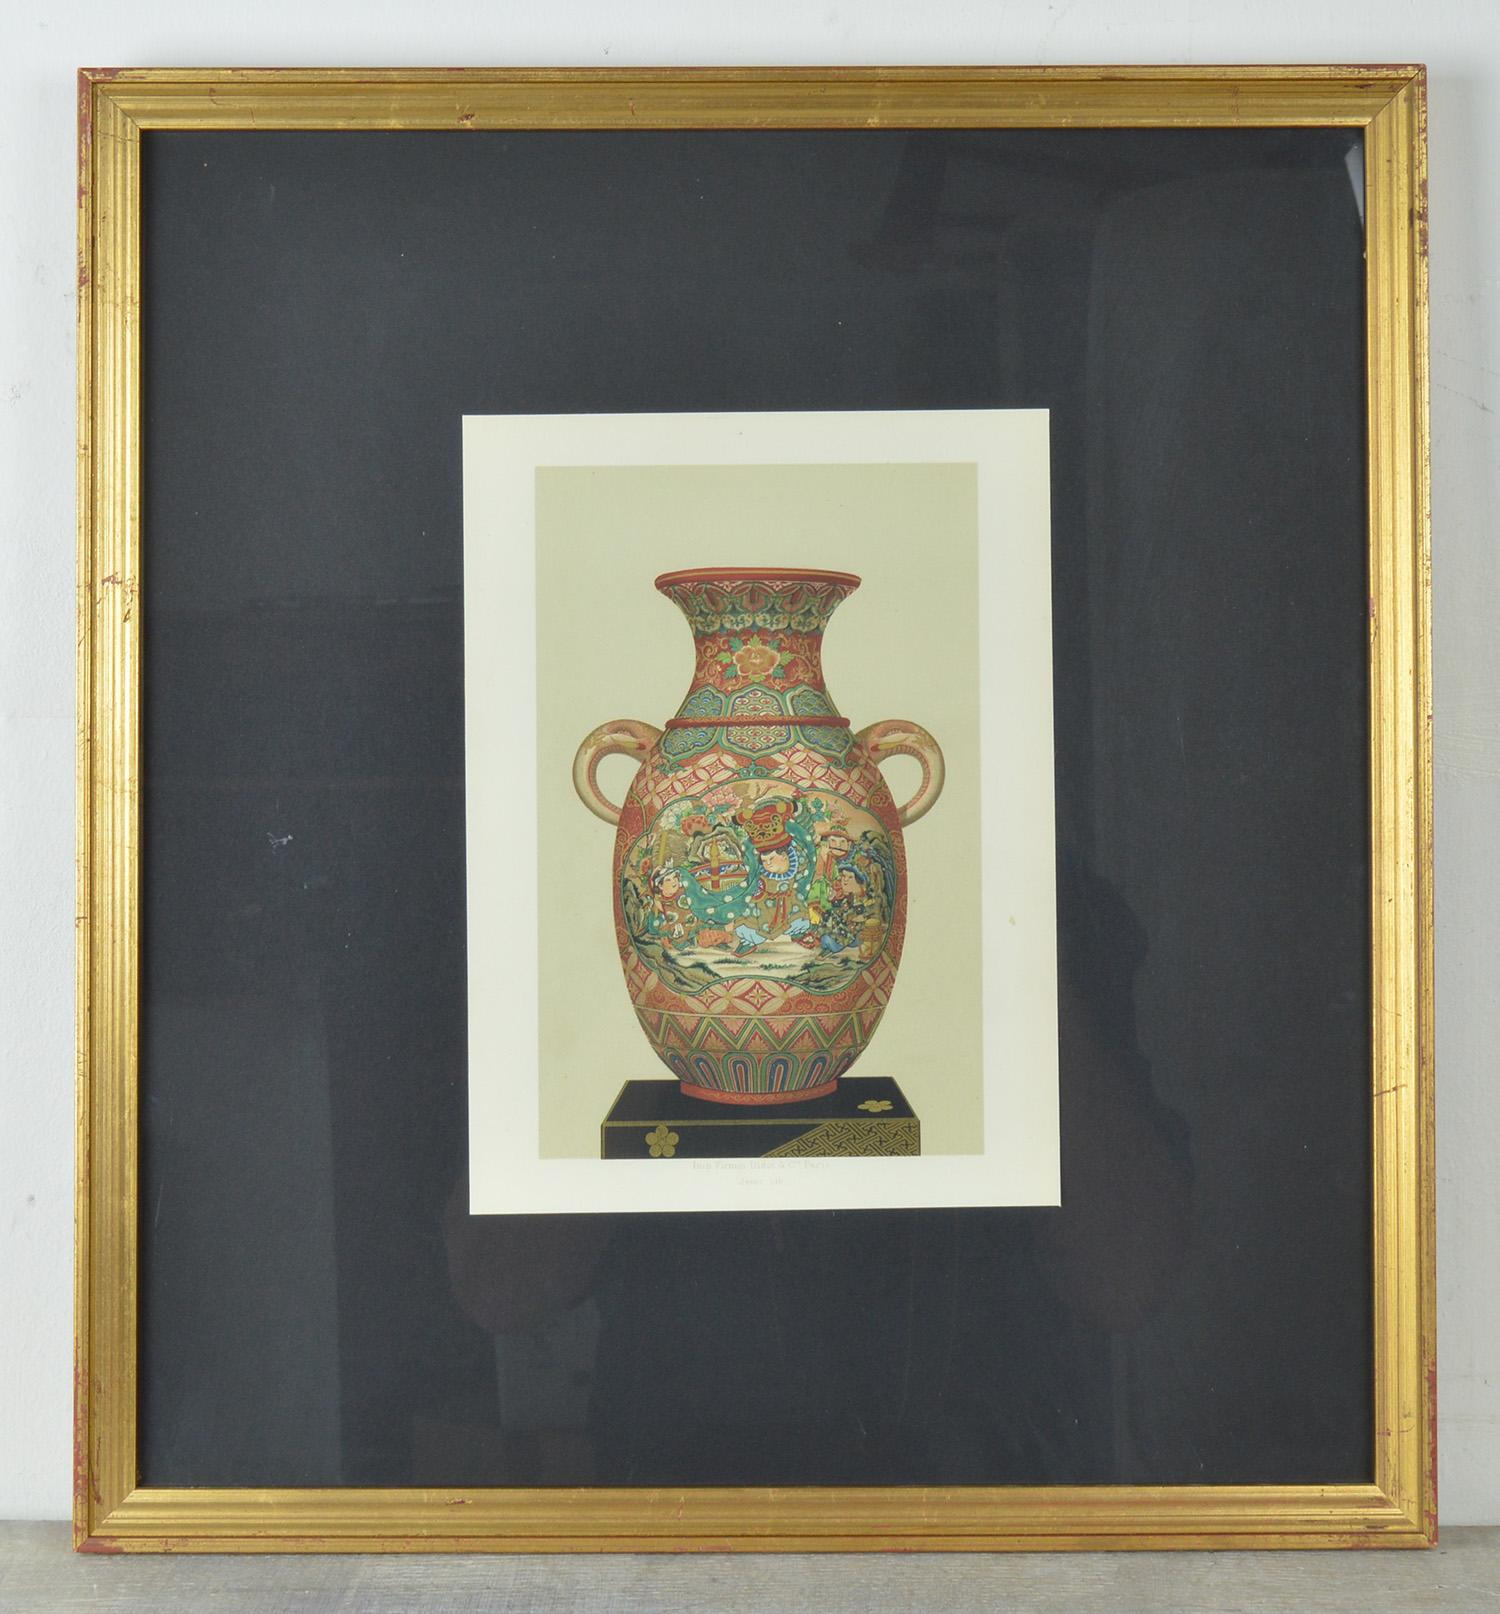 Three amazing chromolithographs of Japanese vases.

Published by Firmin Didot, Paris, circa 1870

Superb colors and detail.

I particularly like the gilt highlights.

Mounted on black card and presented in new gilt frames.

The measurement